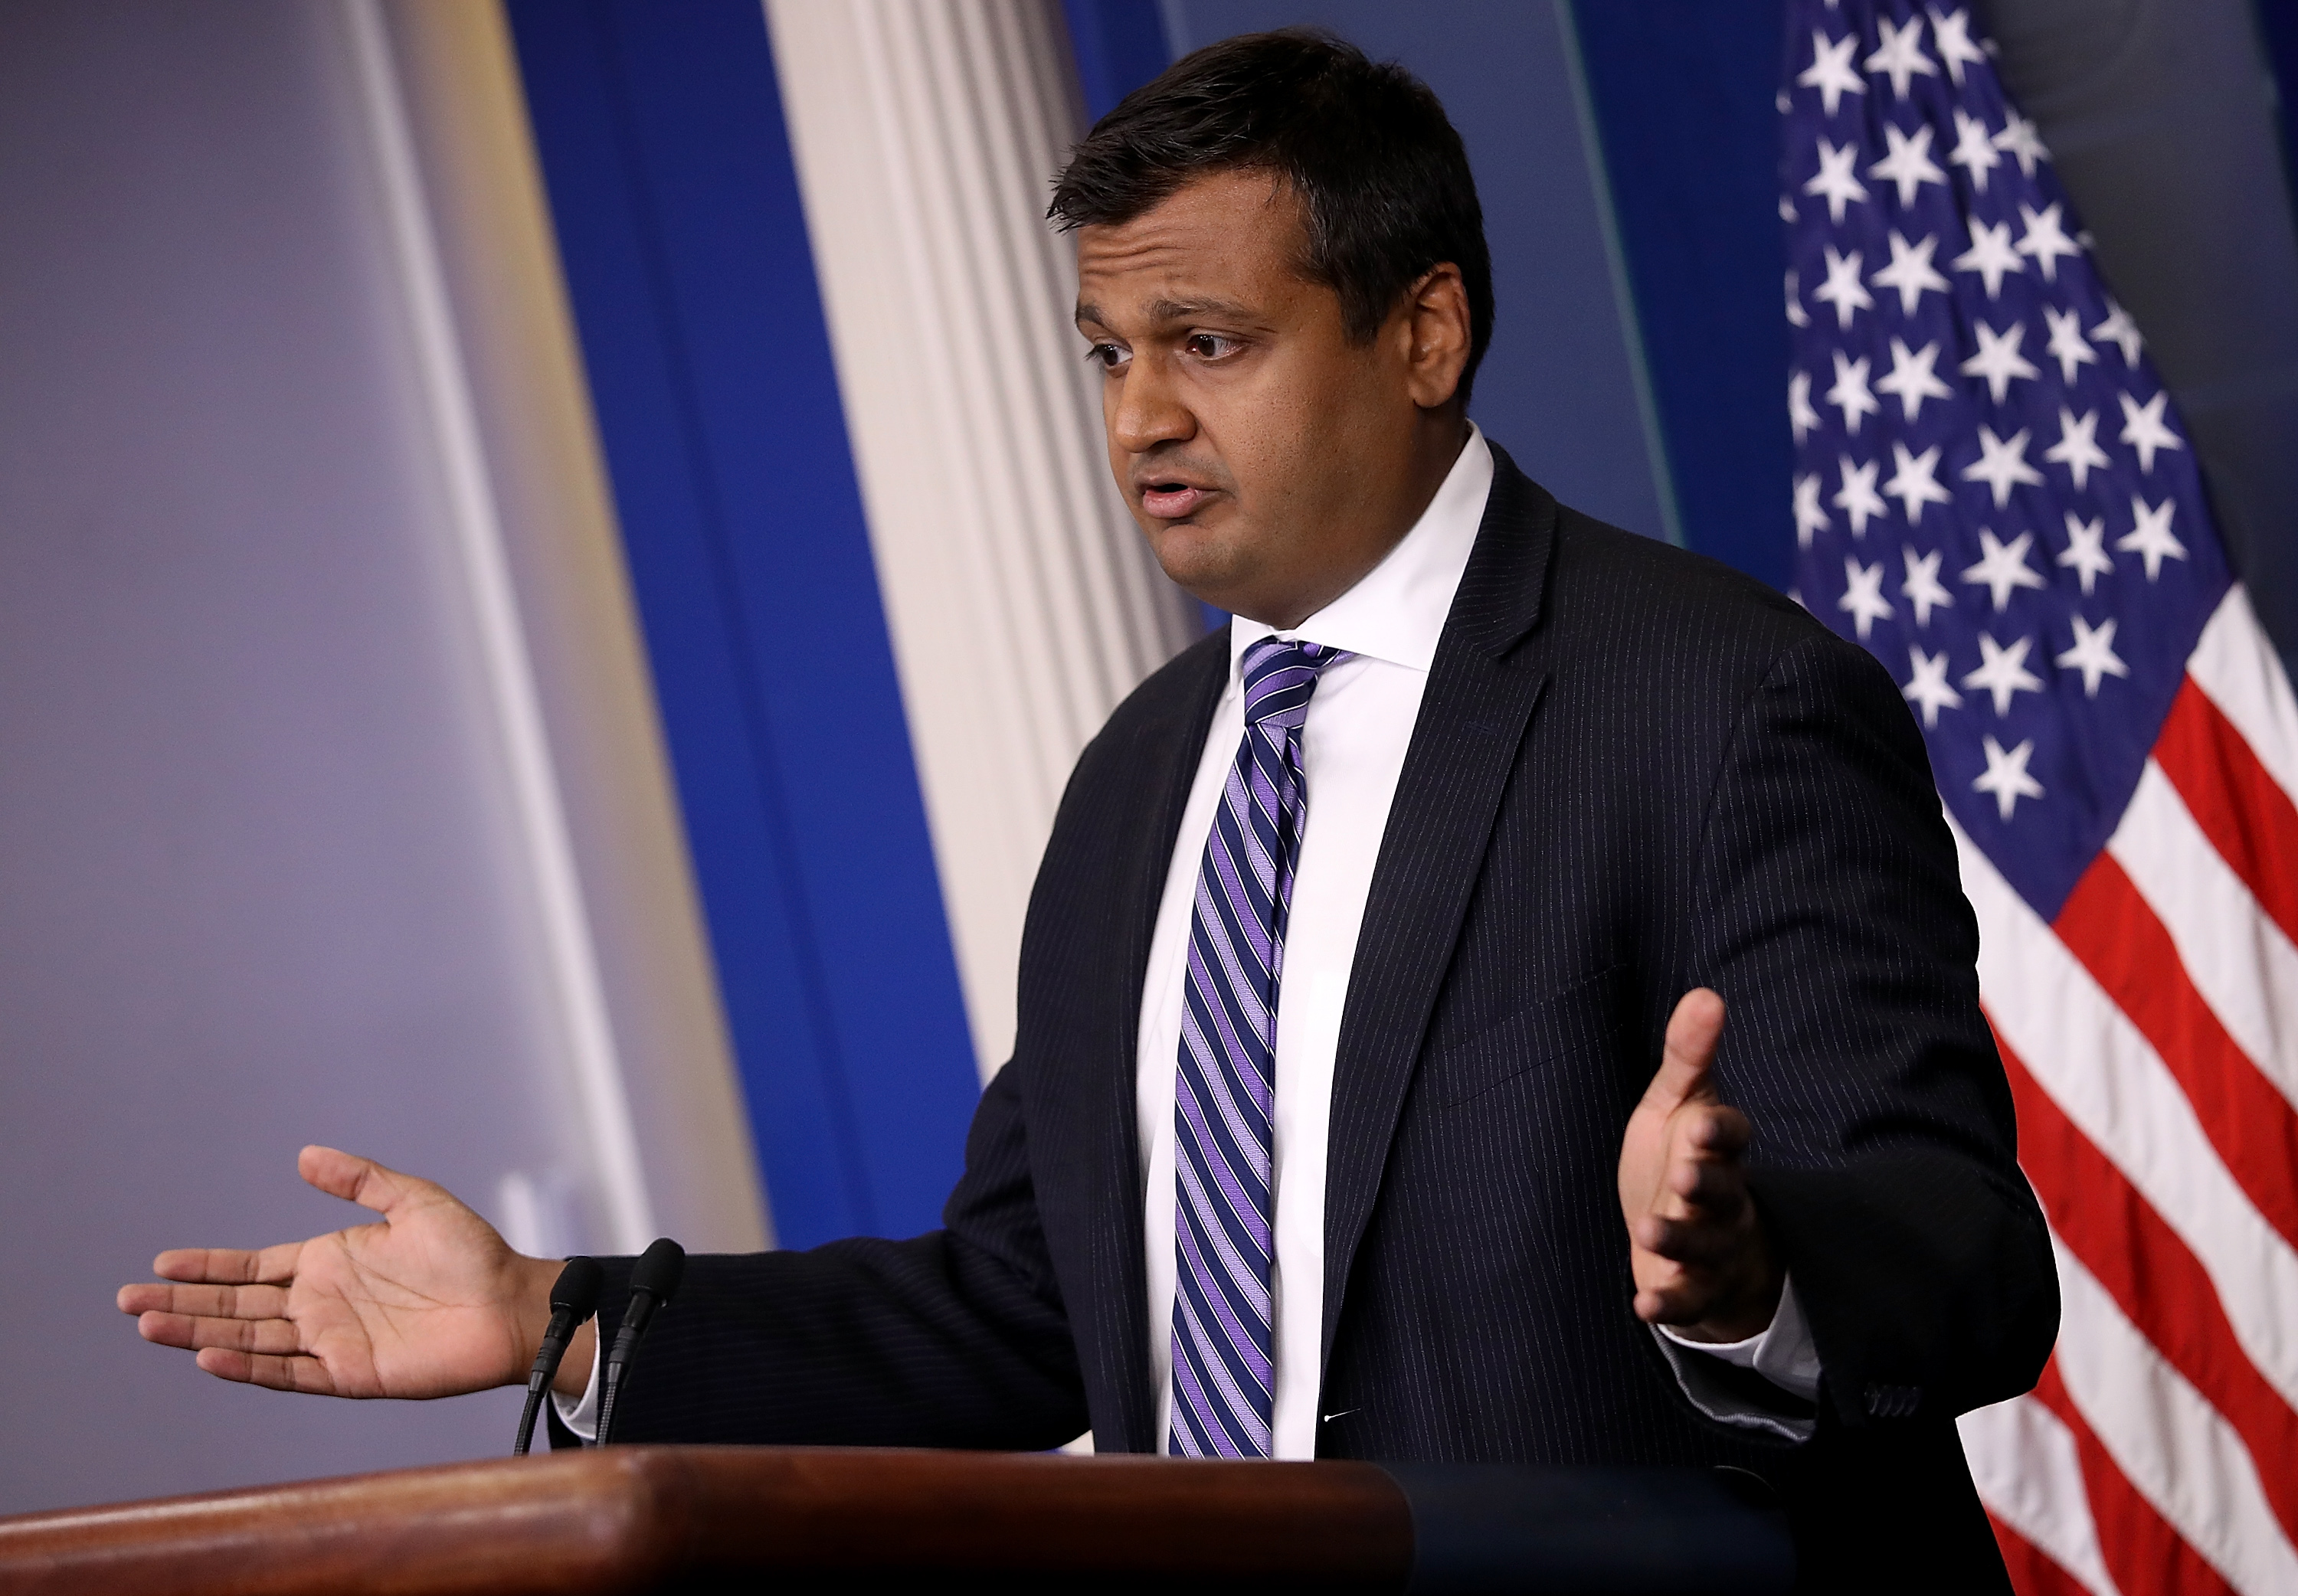 White House Deputy Press Secretary Raj Shah absolves Israel of any blame for the deaths in Gaza.